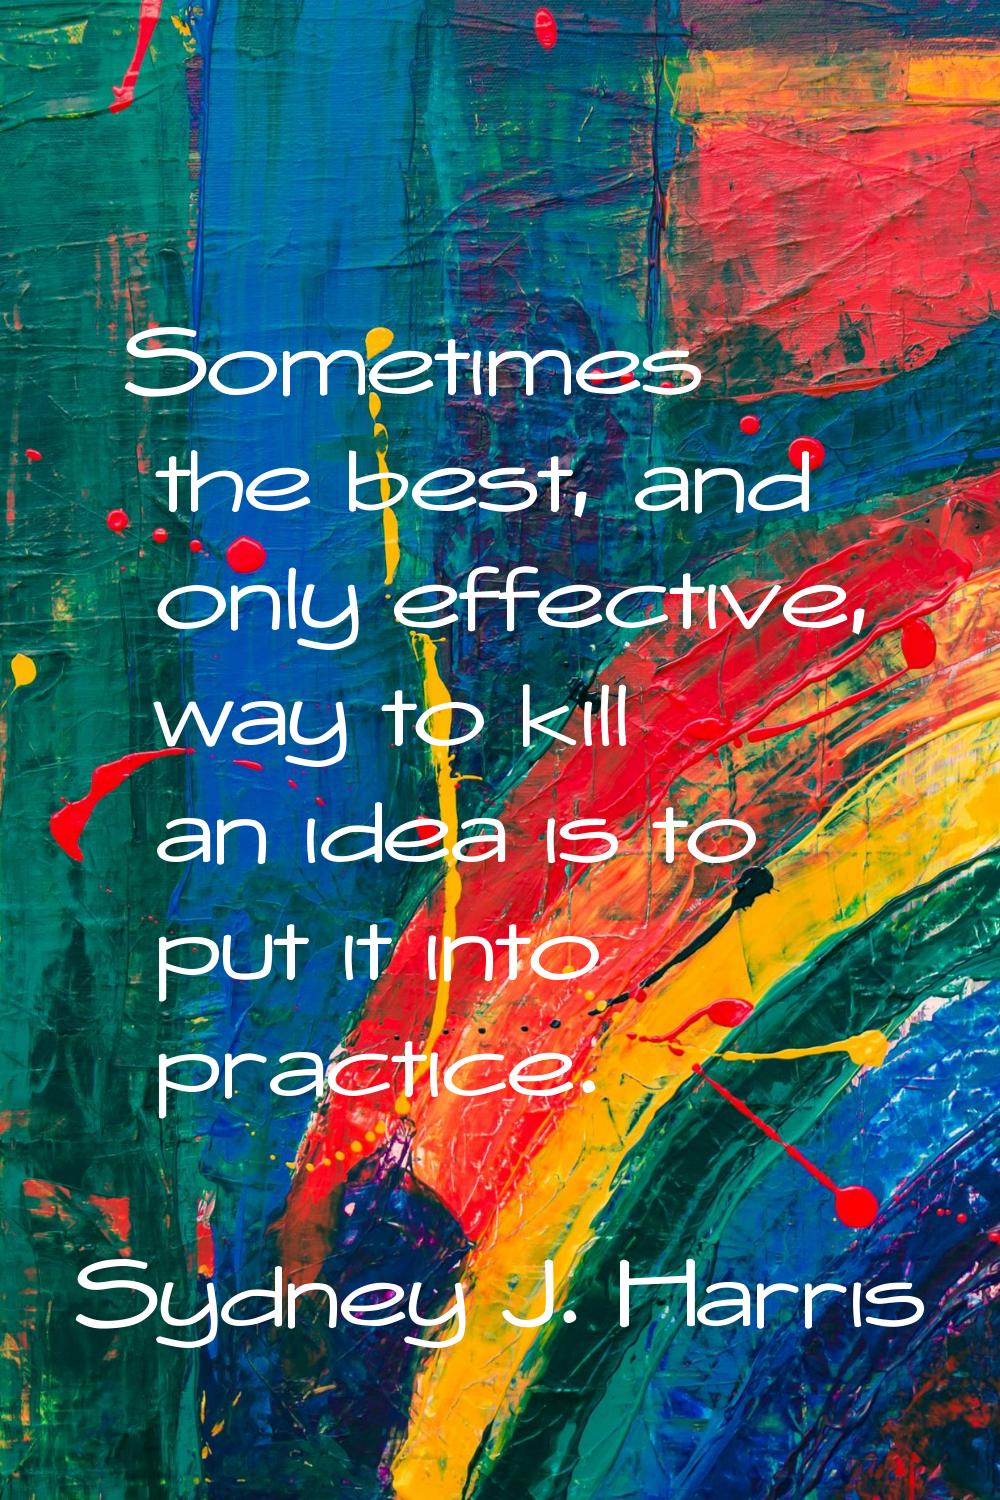 Sometimes the best, and only effective, way to kill an idea is to put it into practice.